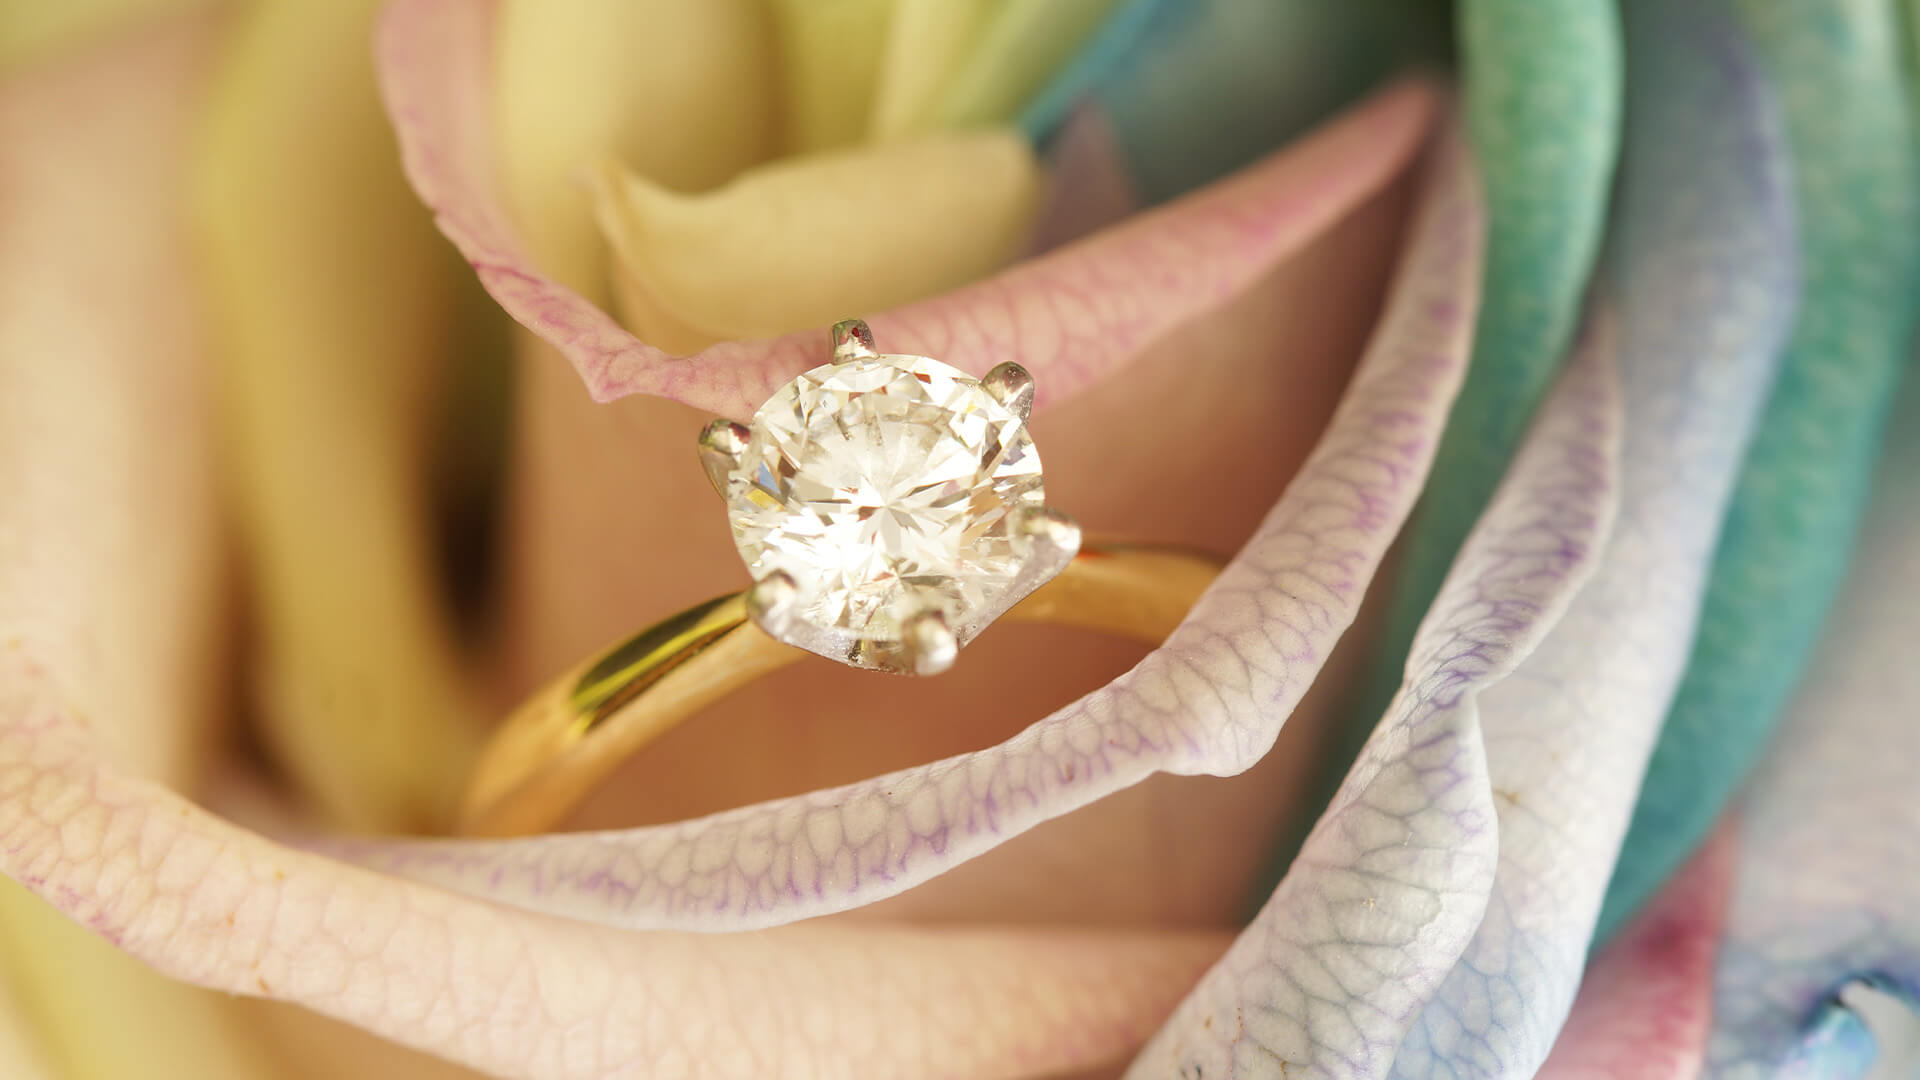 Solitaire diamond ring with a yellow gold band, sitting in an open harlequin rose